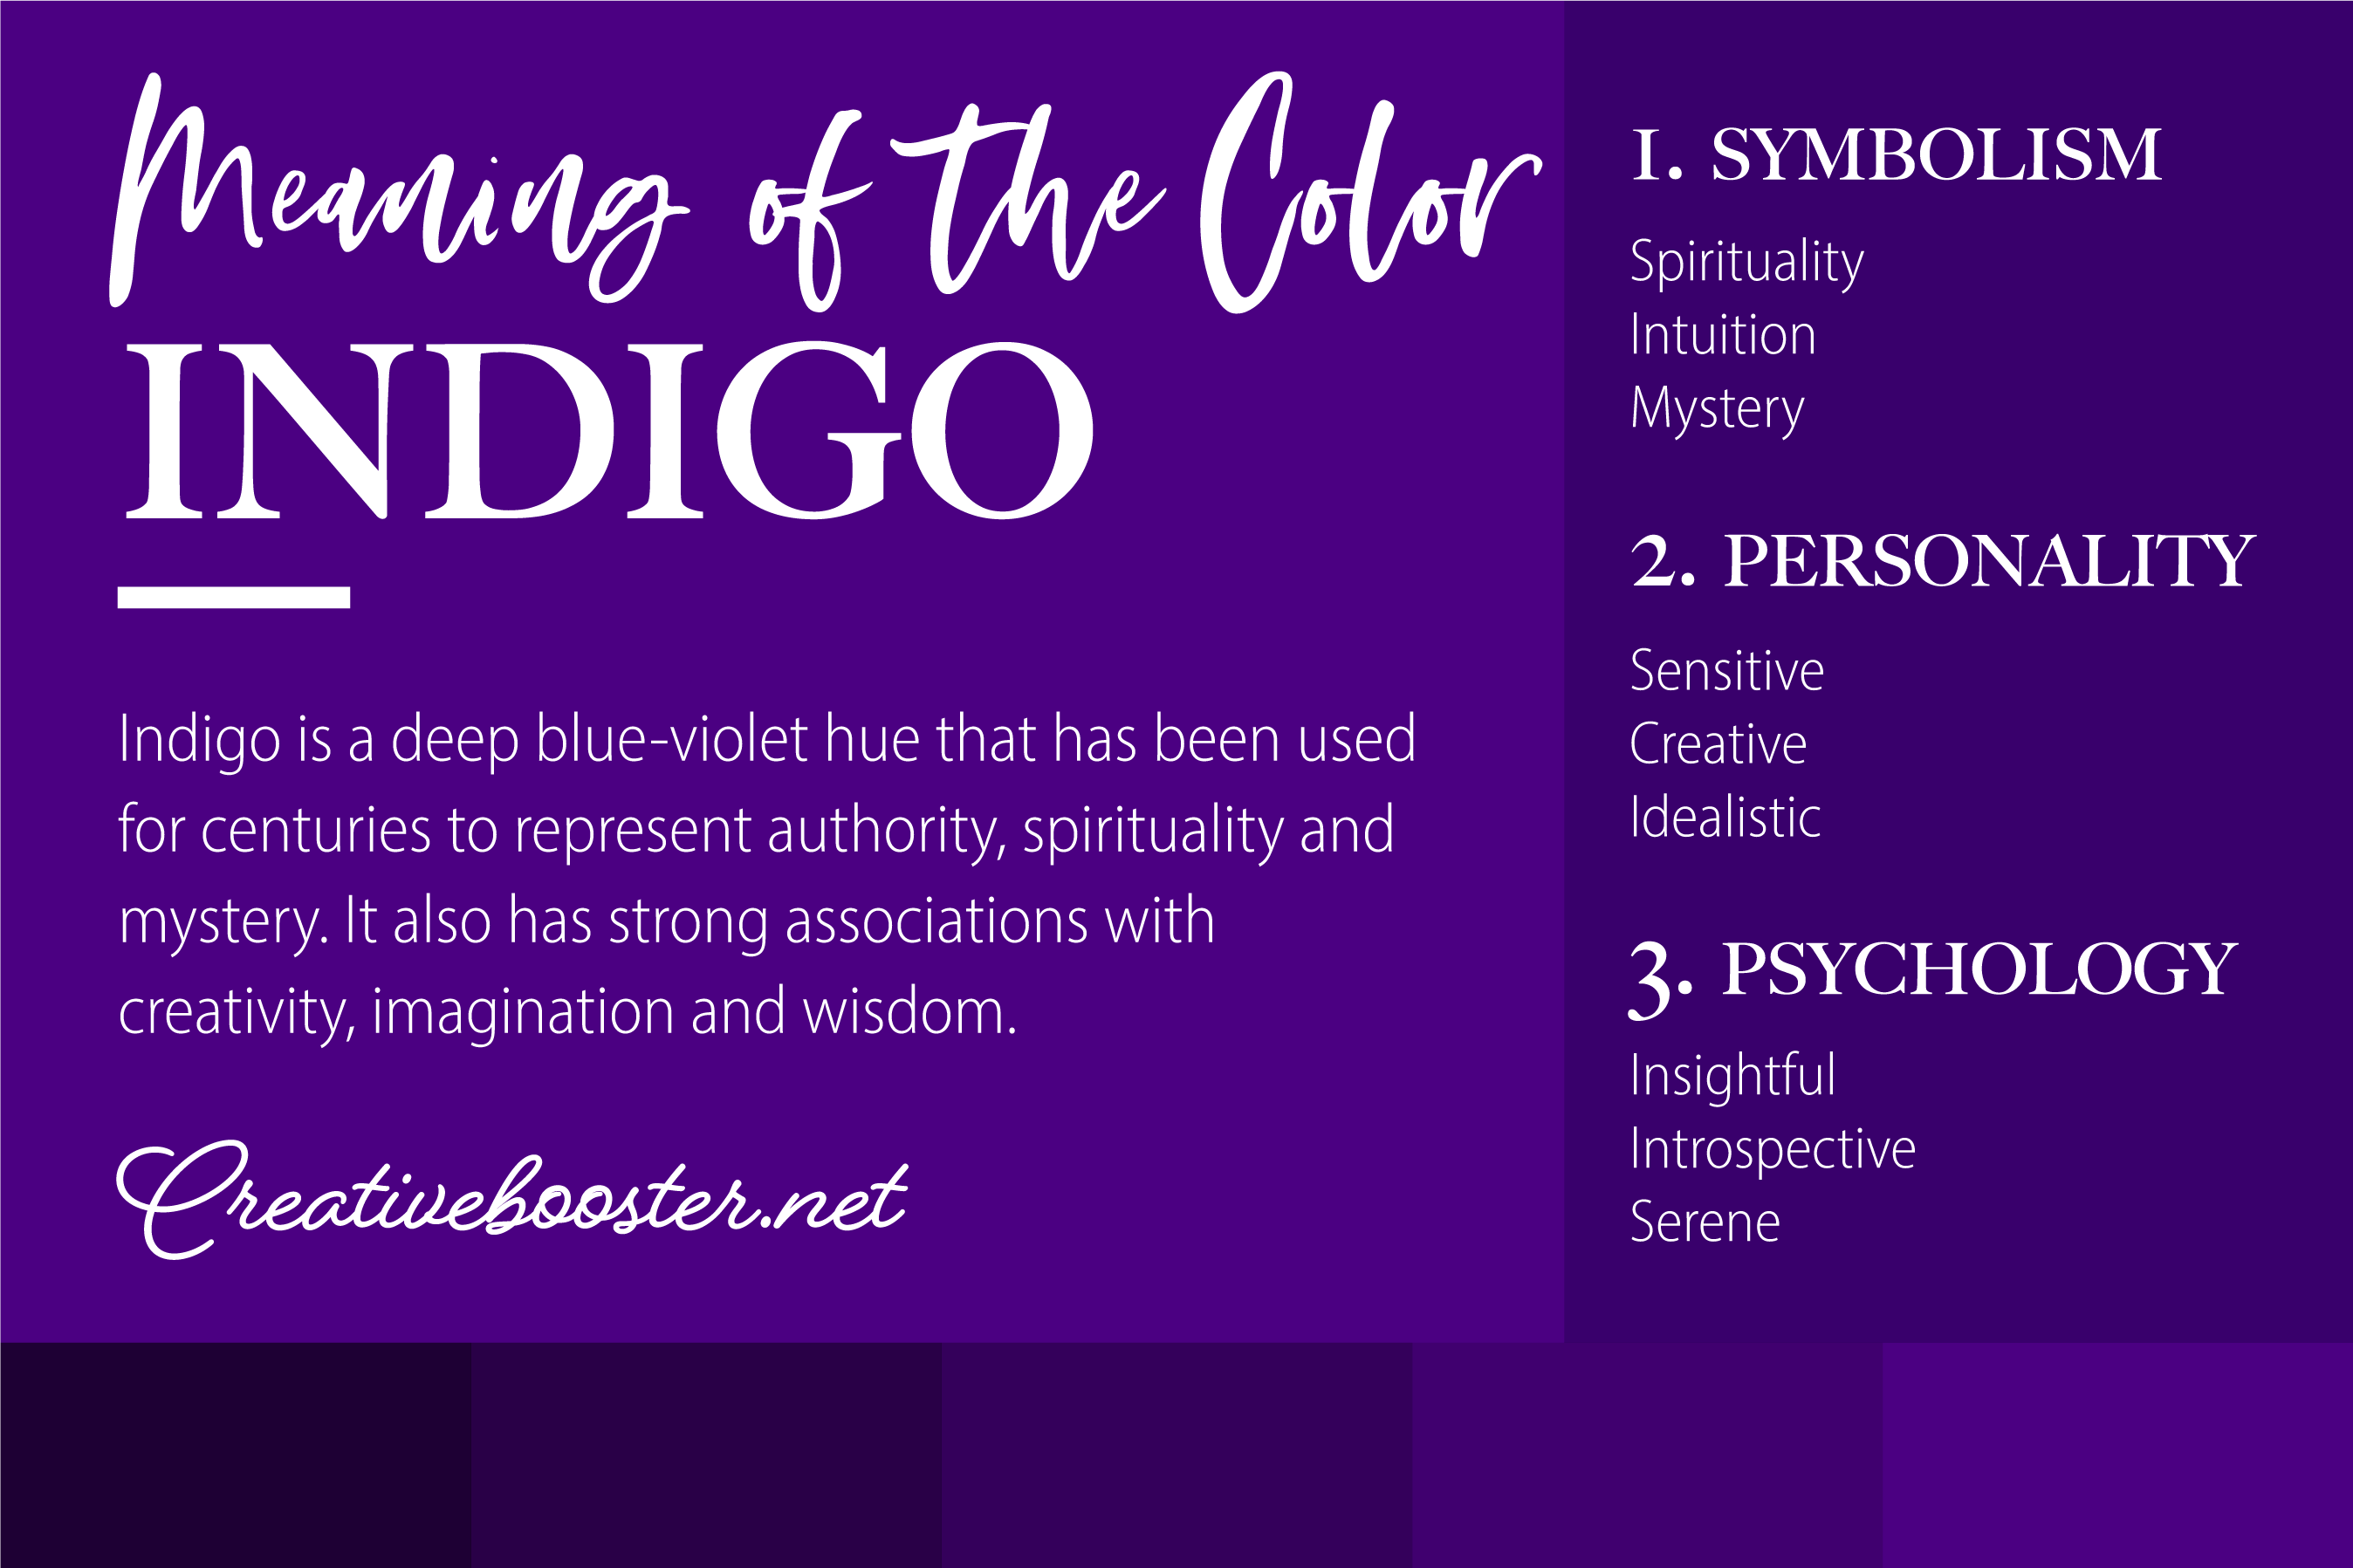 The Meaning of the Color Blue